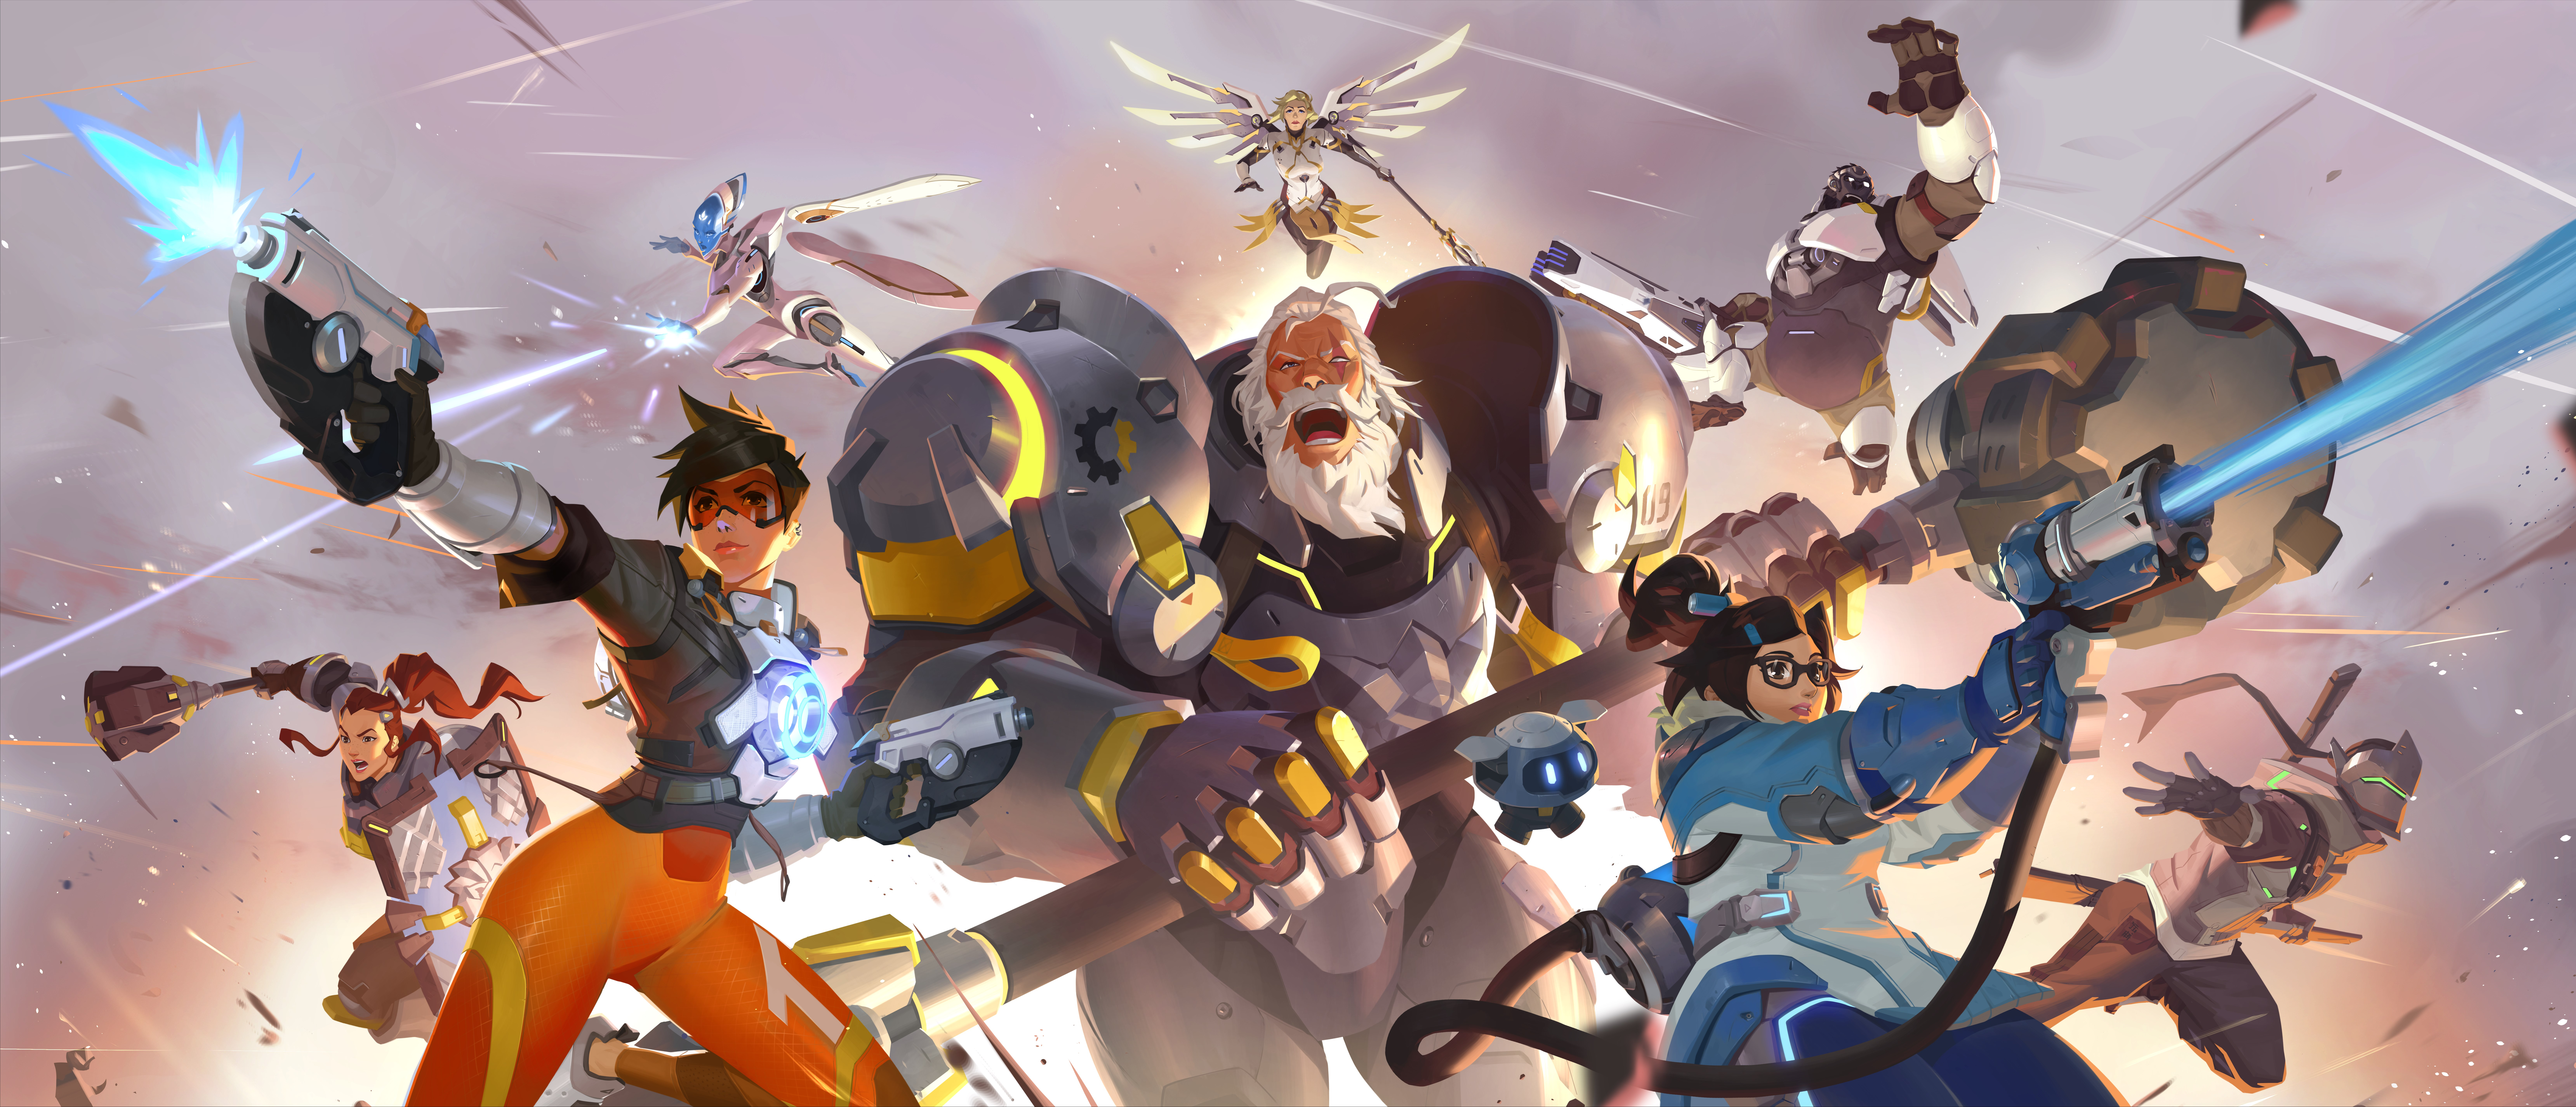 General 13269x5700 video games Overwatch Tracer (Overwatch) PC gaming Reinhardt (Overwatch) Mercy (Overwatch) Mei (Overwatch) Brigitte (Overwatch) Genji (Overwatch) Winston (Overwatch) digital art drawing concept art artwork video game girls video game characters video game men girls with guns